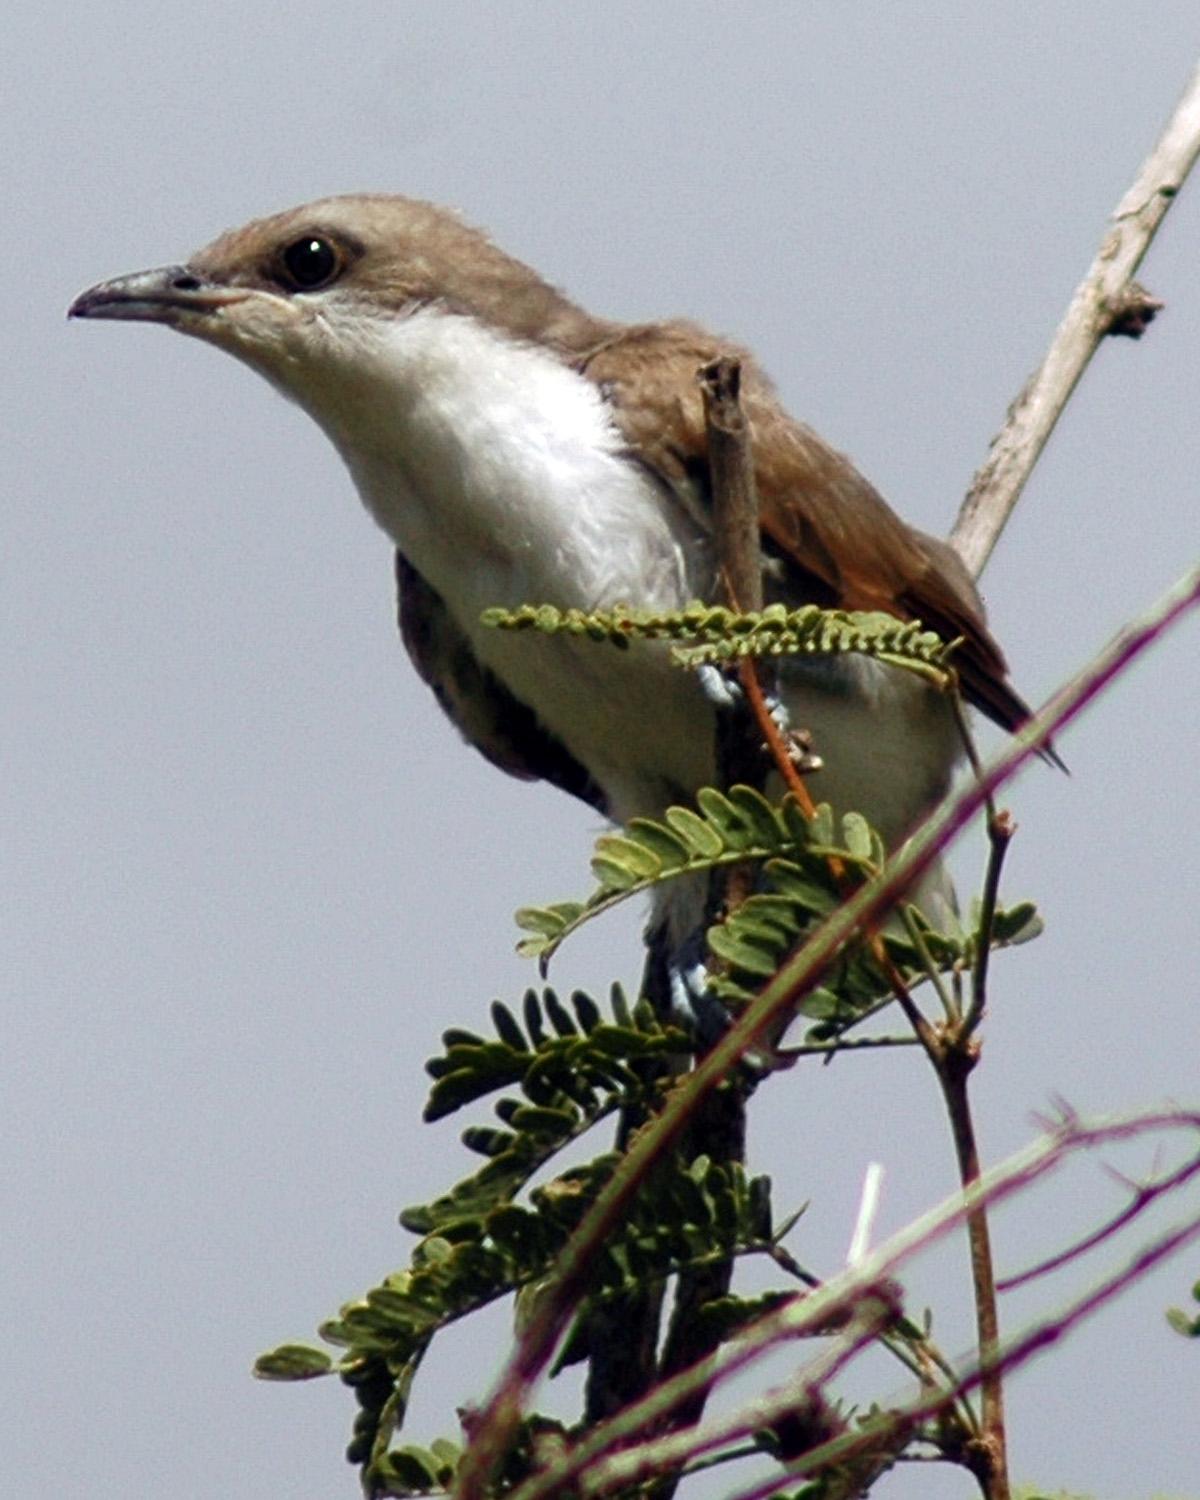 Yellow-billed Cuckoo Photo by Magill Weber